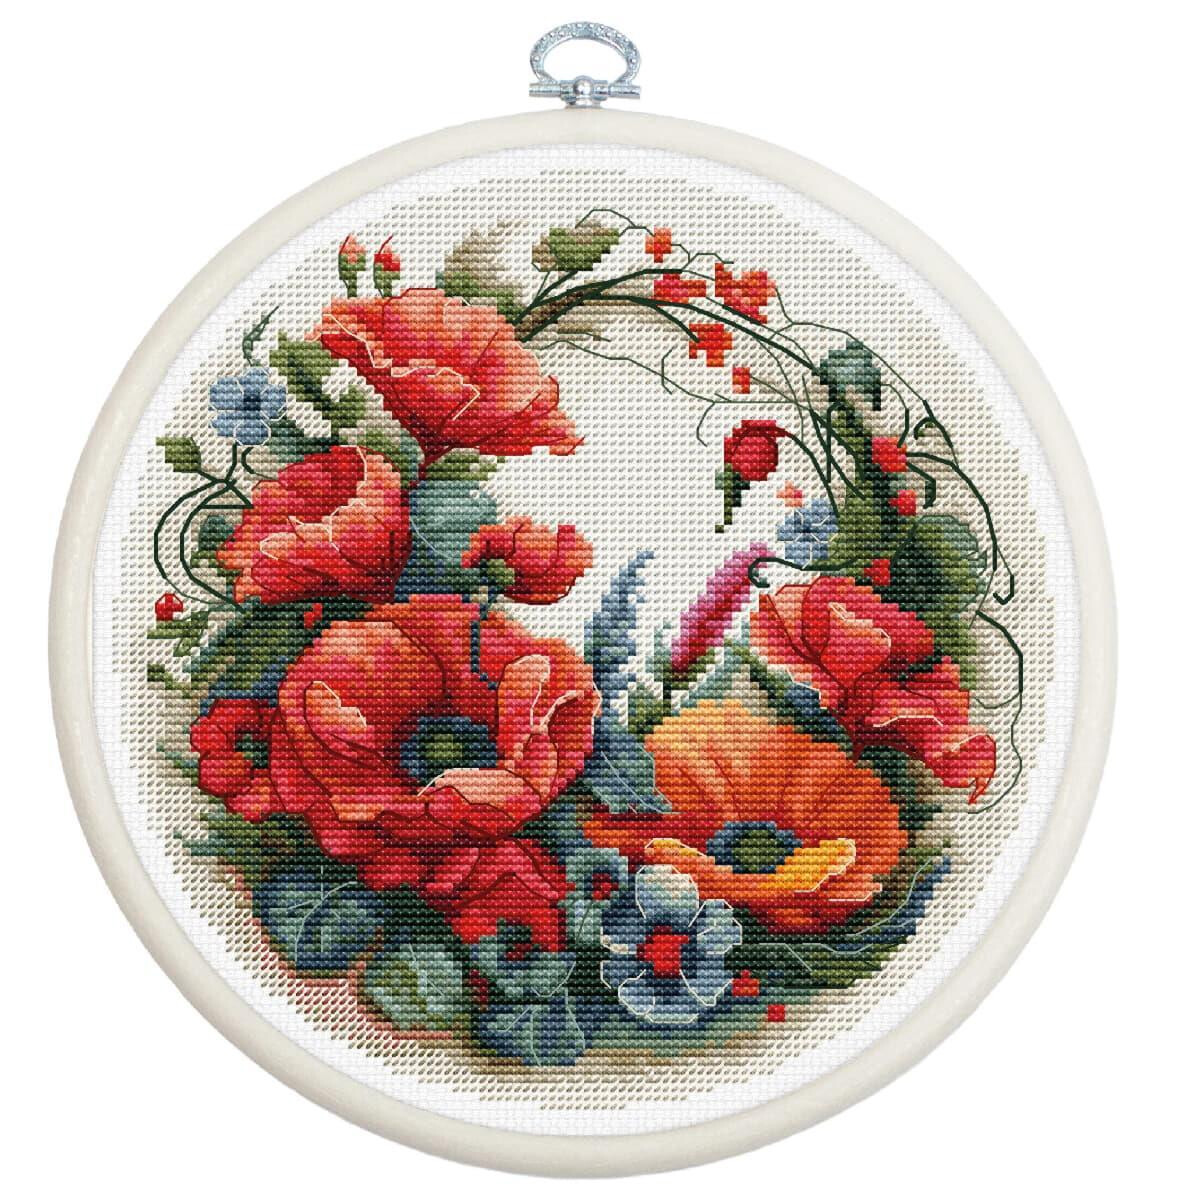 An embroidery hoop with an intricate cross stitch design...